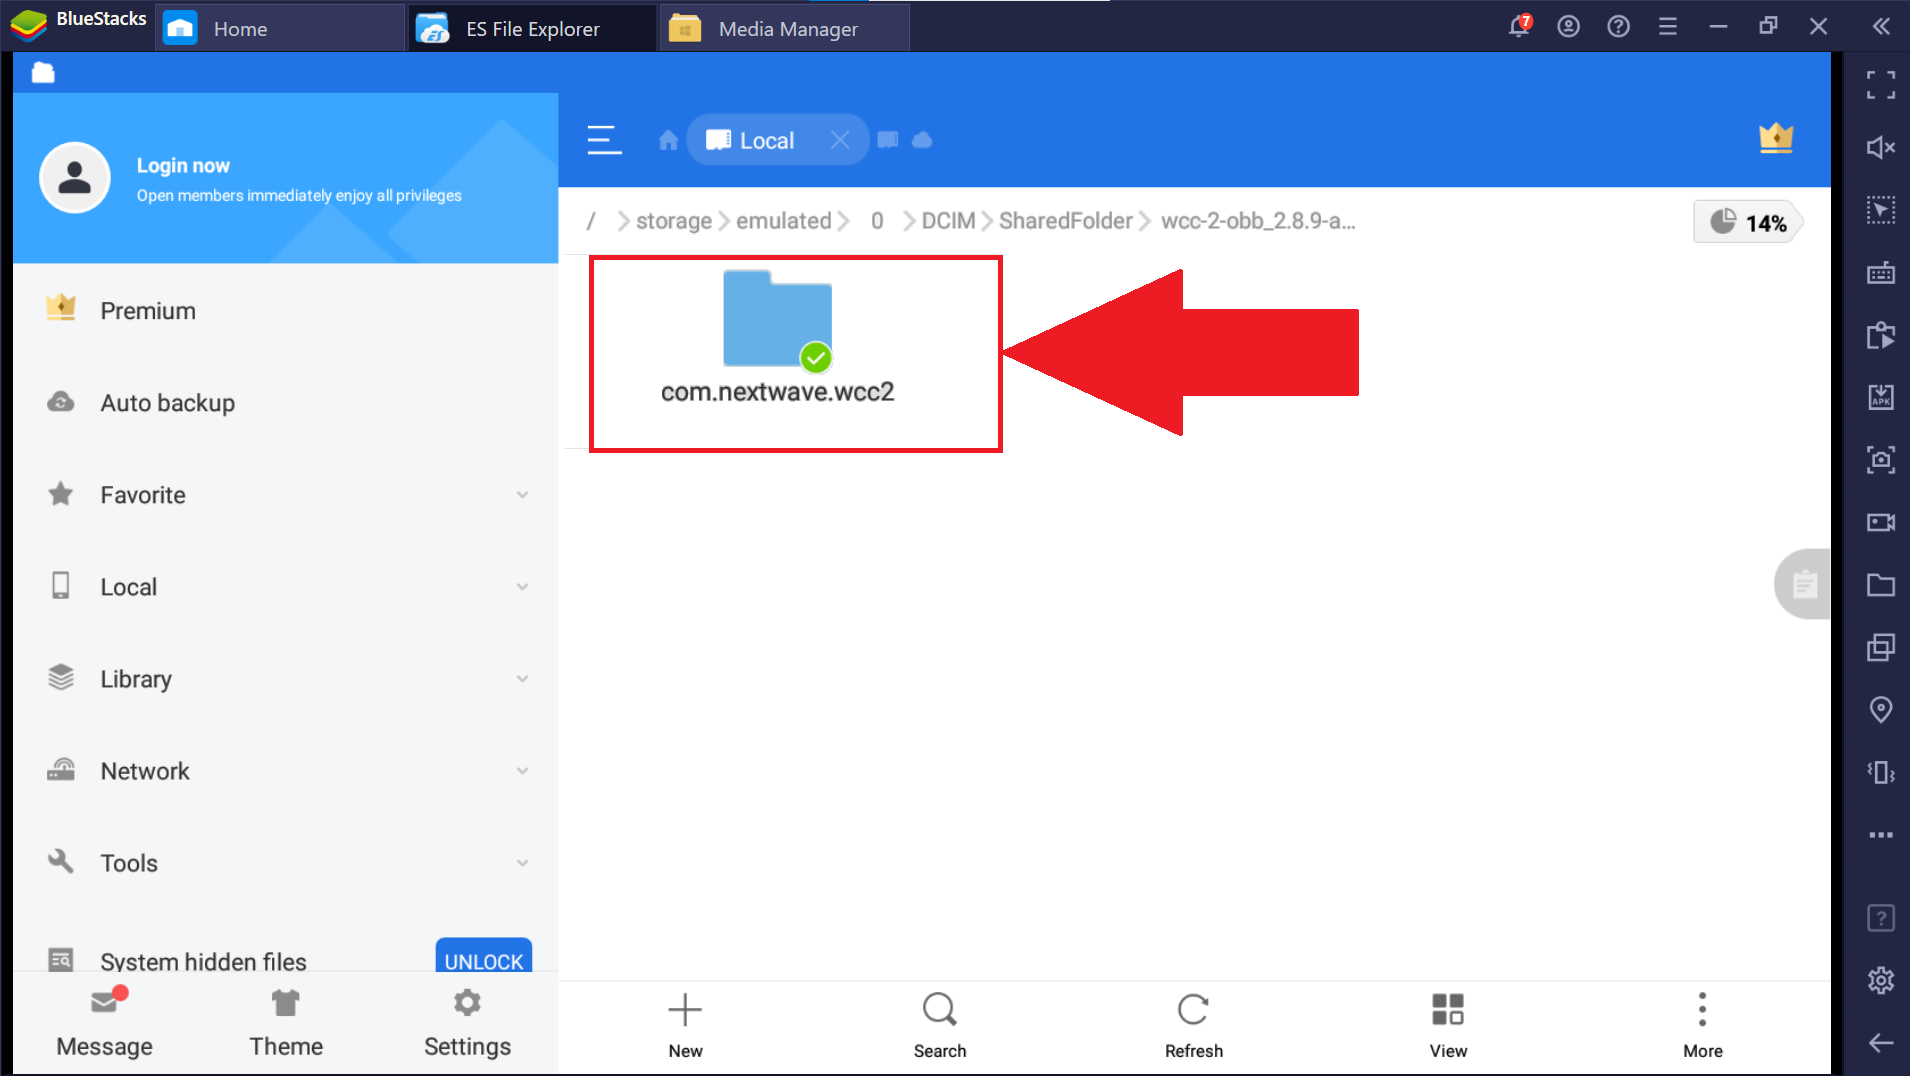 How to install apk file with obb (data file) on BlueStacks 4 – BlueStacks  Support